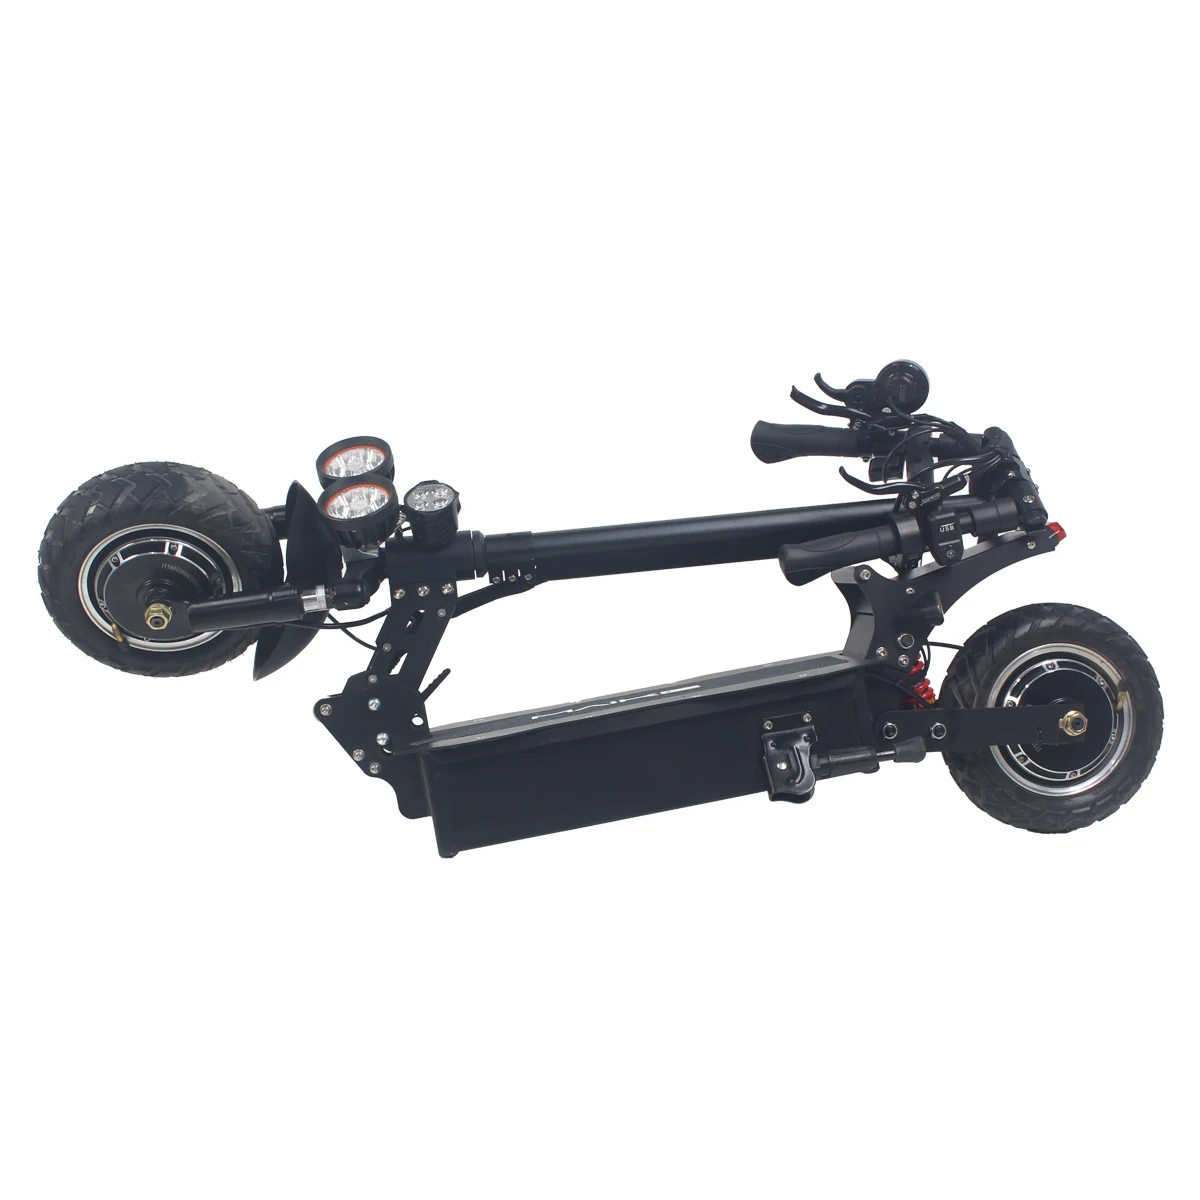 

Black friday maike mk6 1000w 2000w dual motor foldable e scooter off road electric mobility kick scooter adults